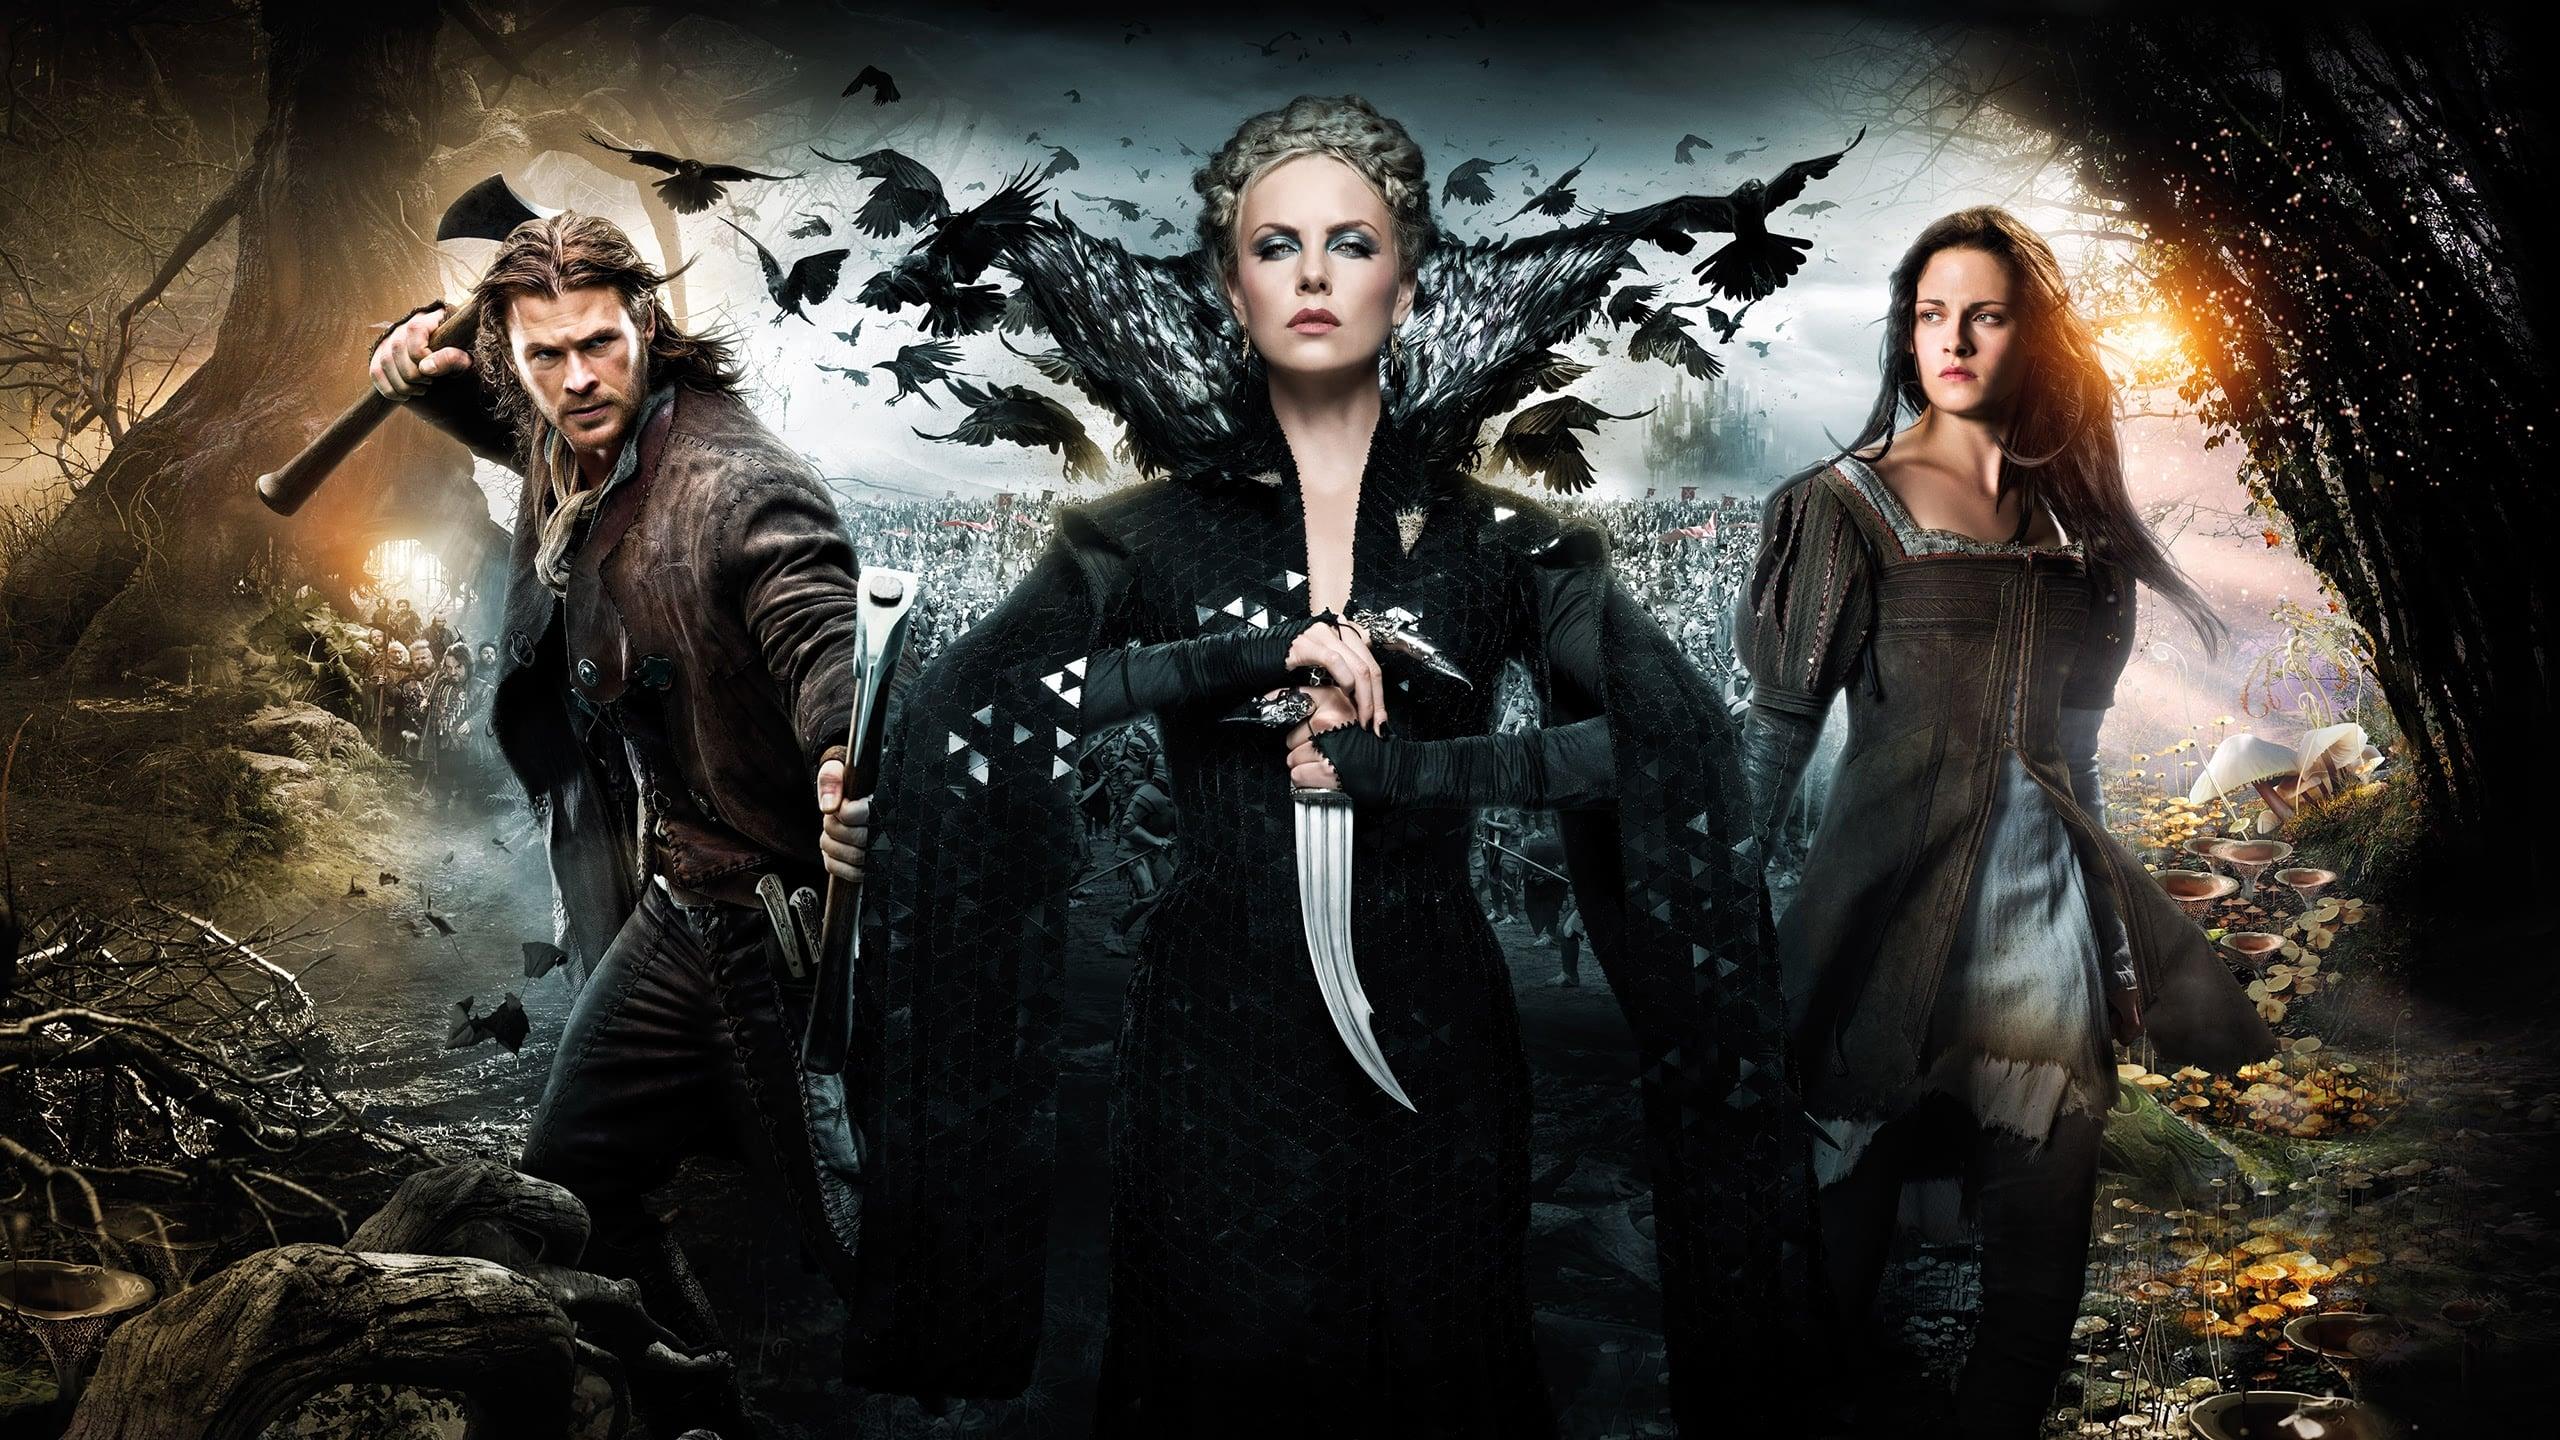 Snow White and the Huntsman backdrop